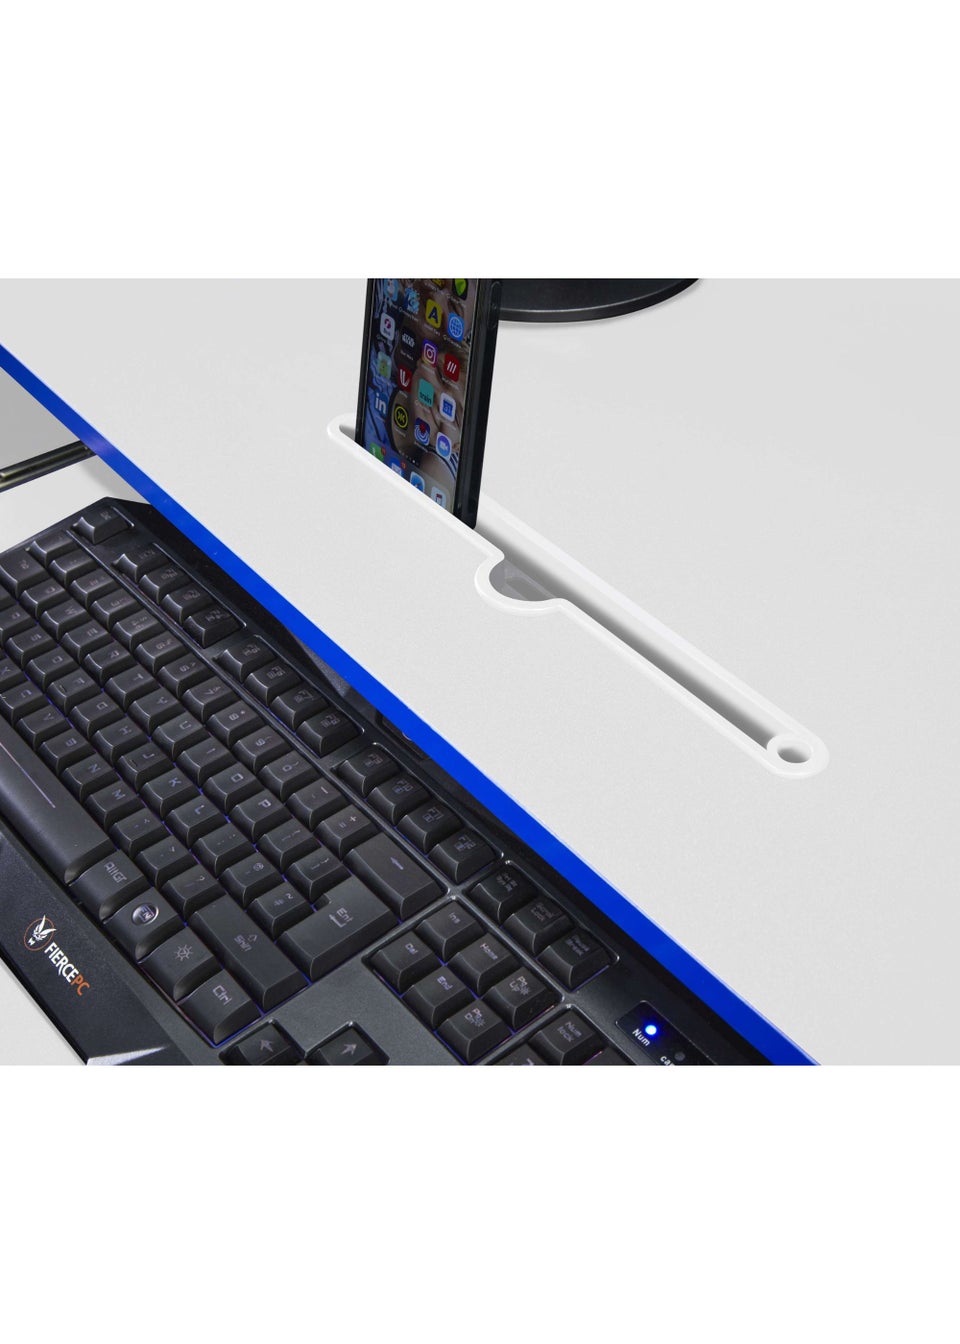 Lloyd Pascal Holywell Gaming Desk in White and Blue